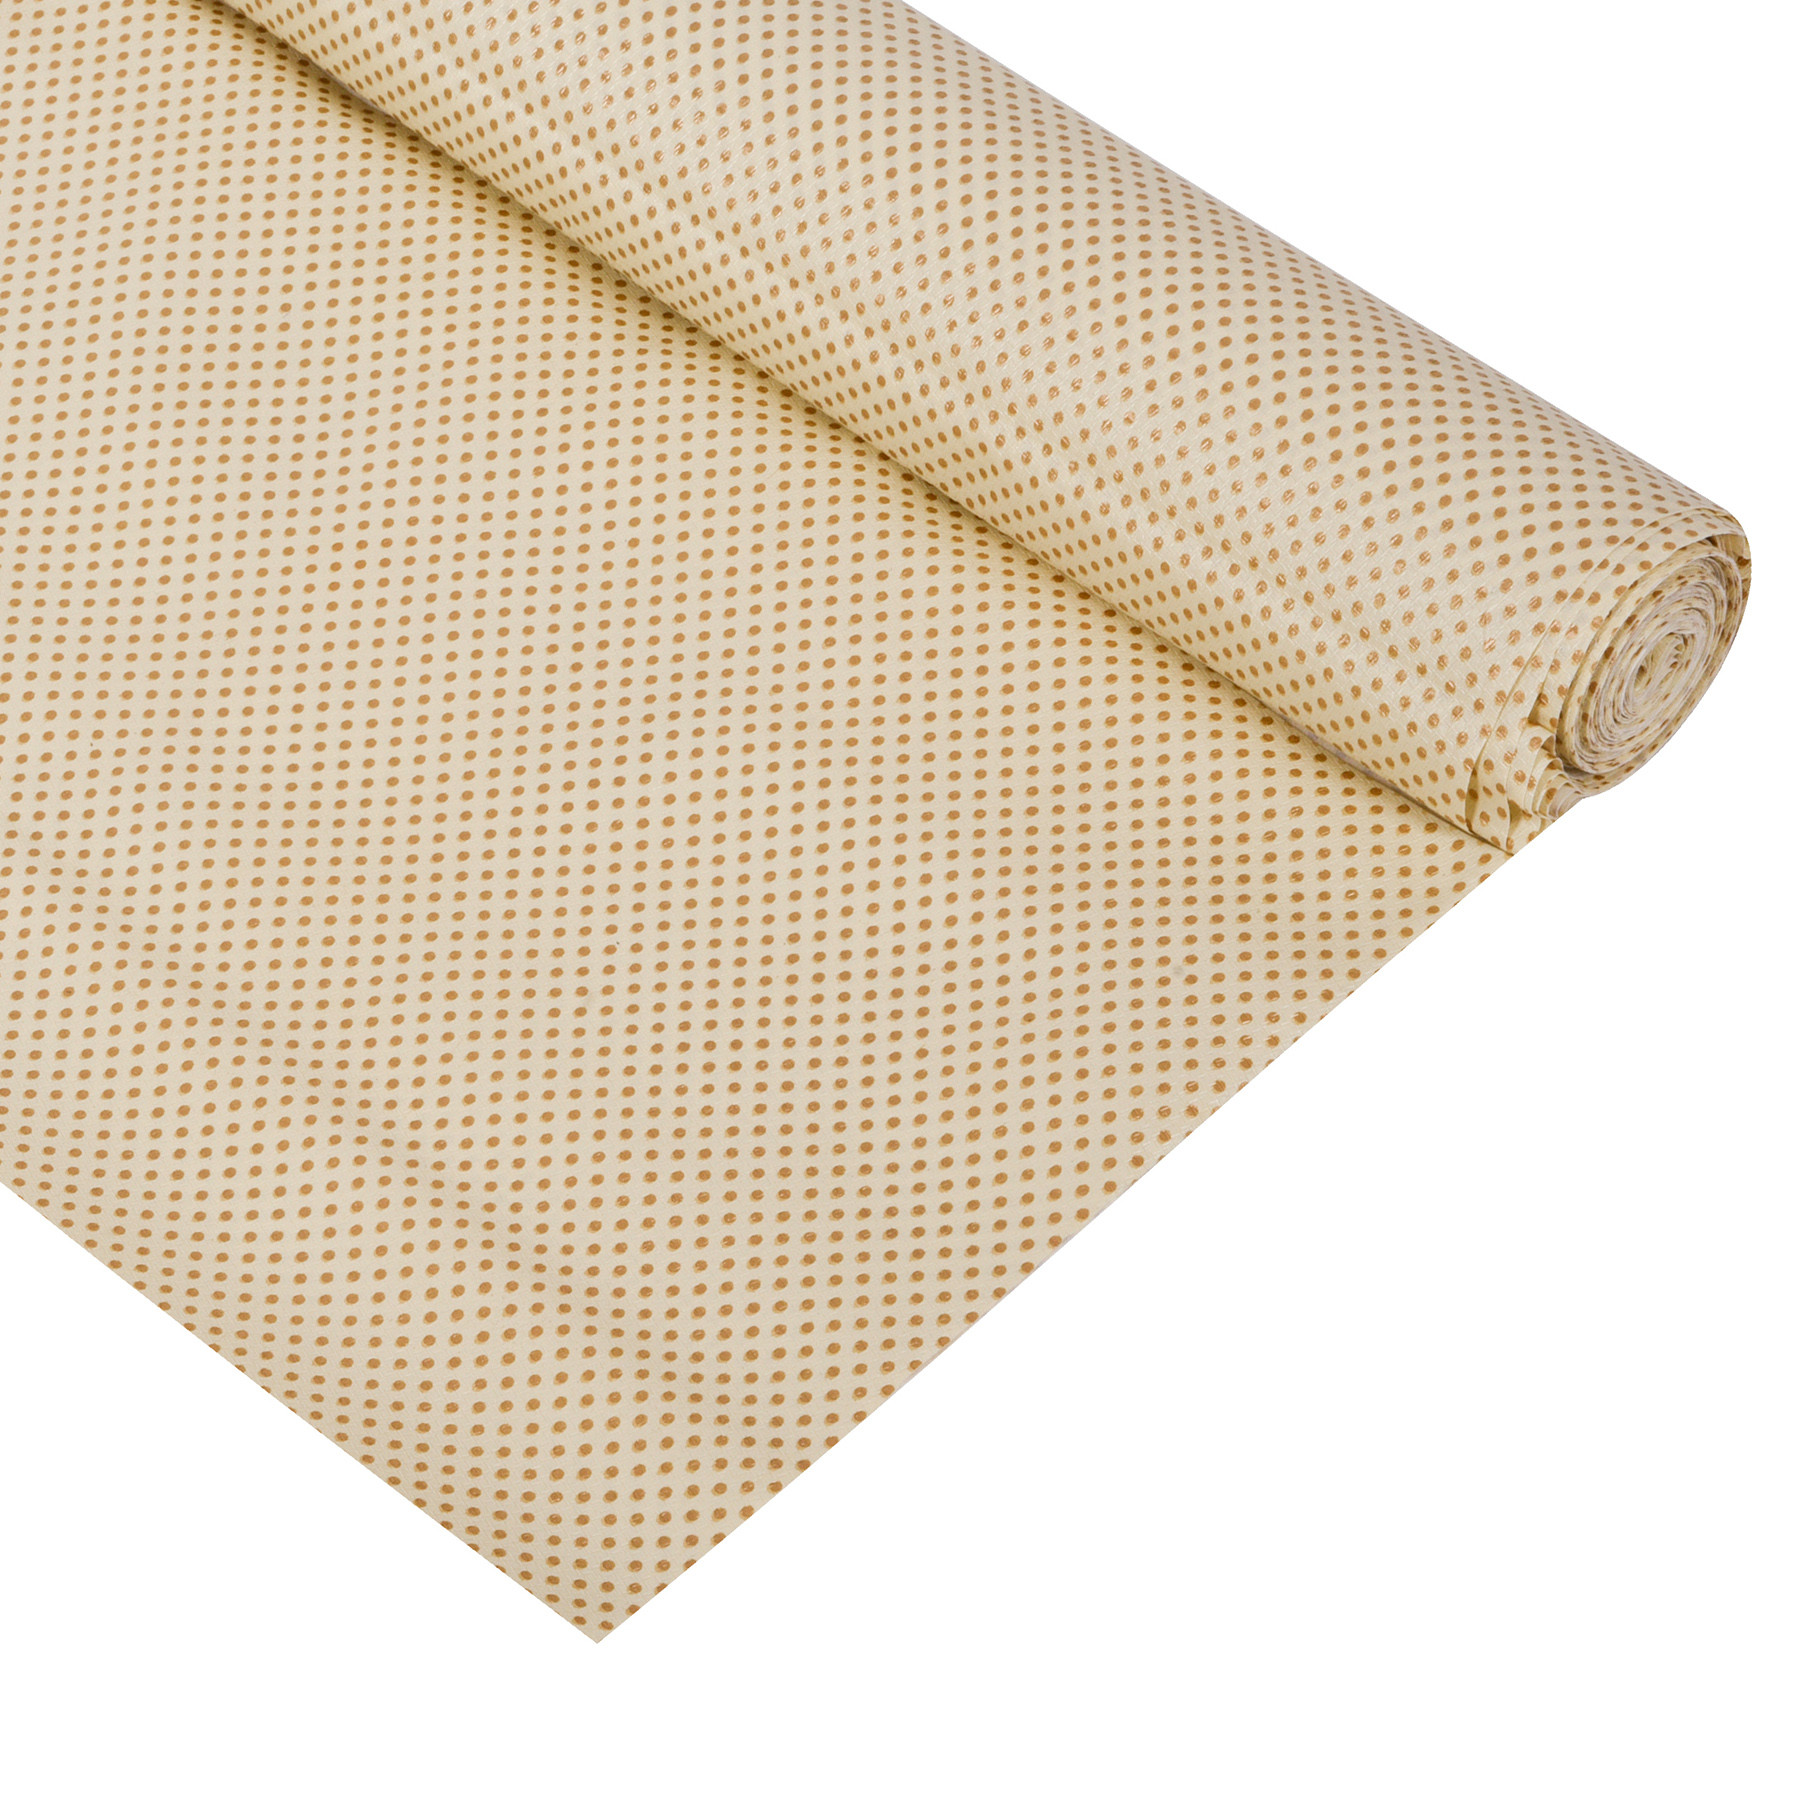 Kuber Industries Shelf Liner | Kitchen Cabinet Shelf Protector | Kitchen Liners for Cabinets and Drawers | Drawer Liner Mat | Dot Shelf Liner Cabinet Mat | 5 MTR | Golden